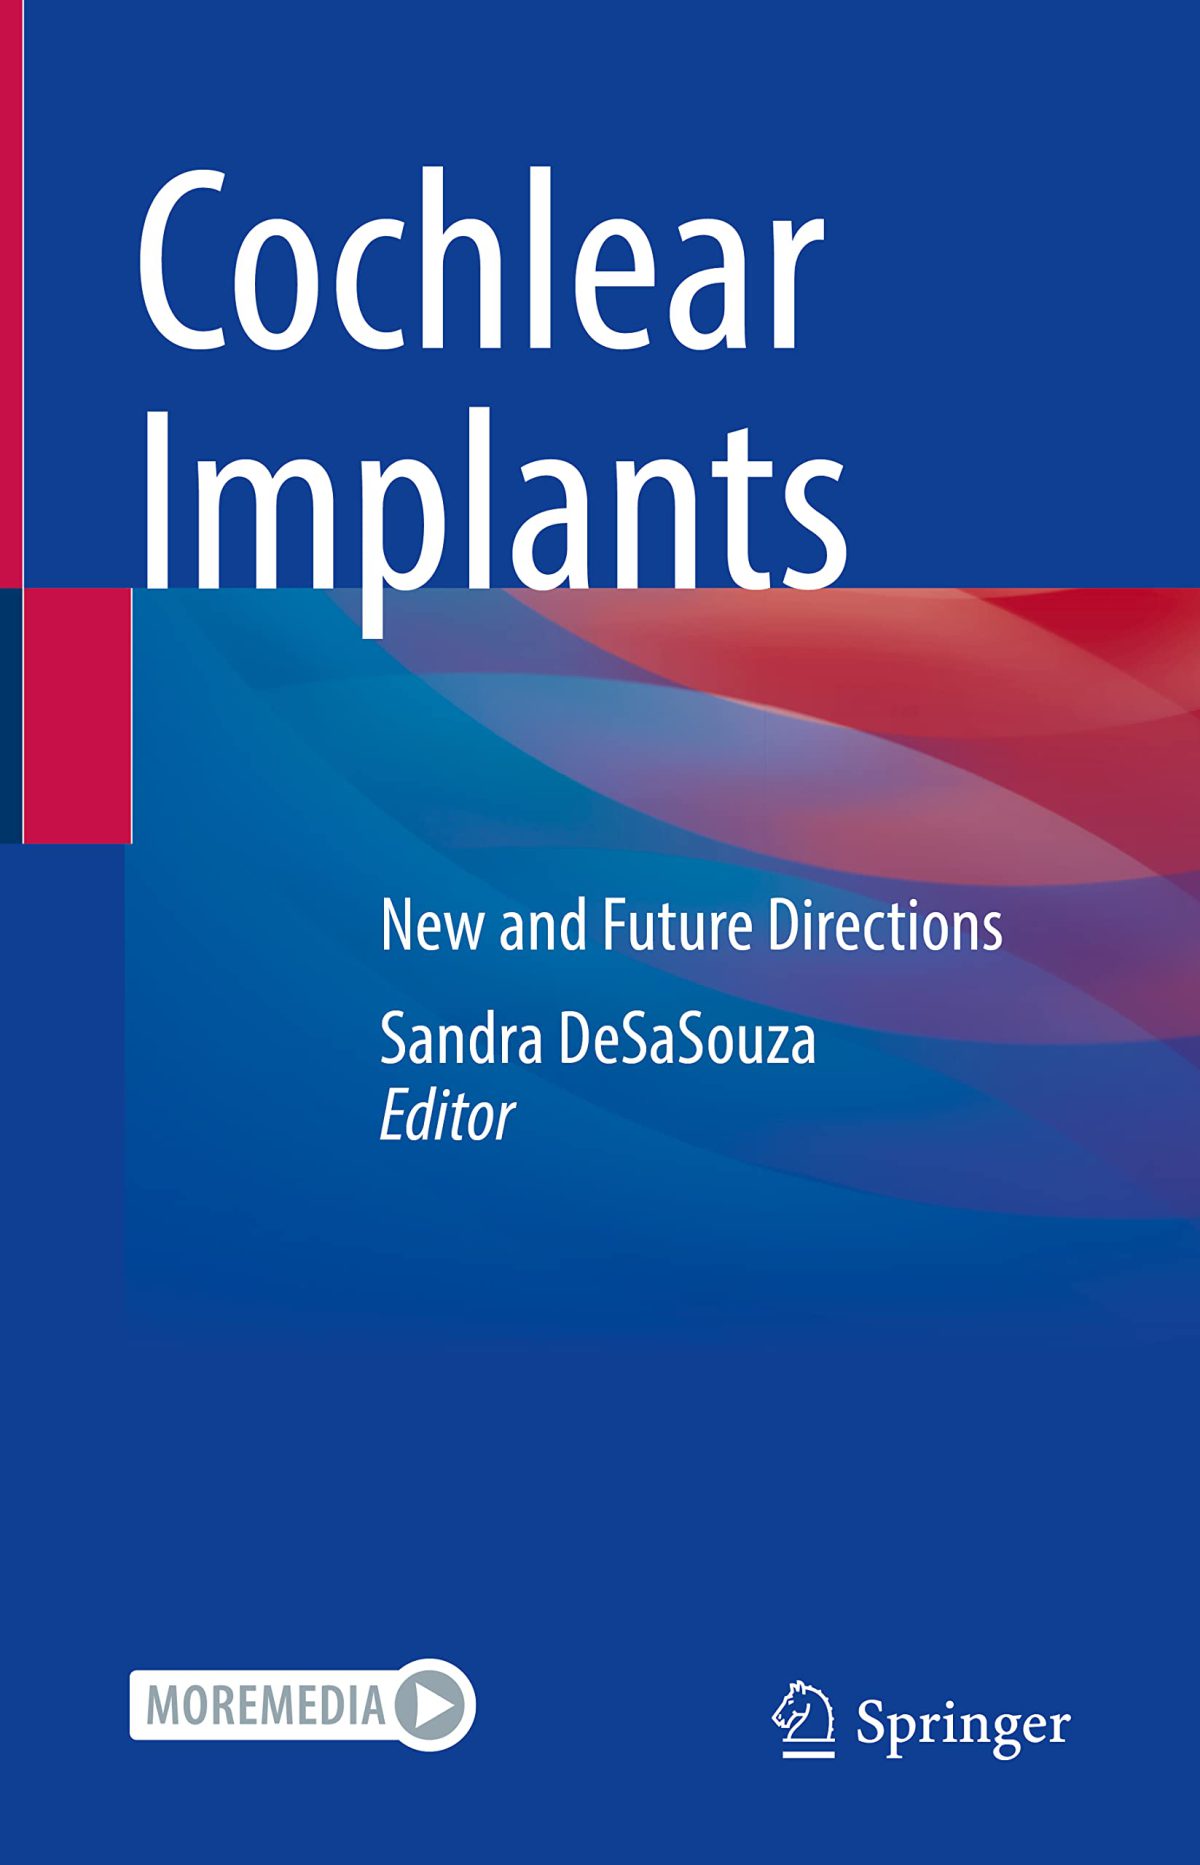 Cochlear Implants: New and Future Directions 2022